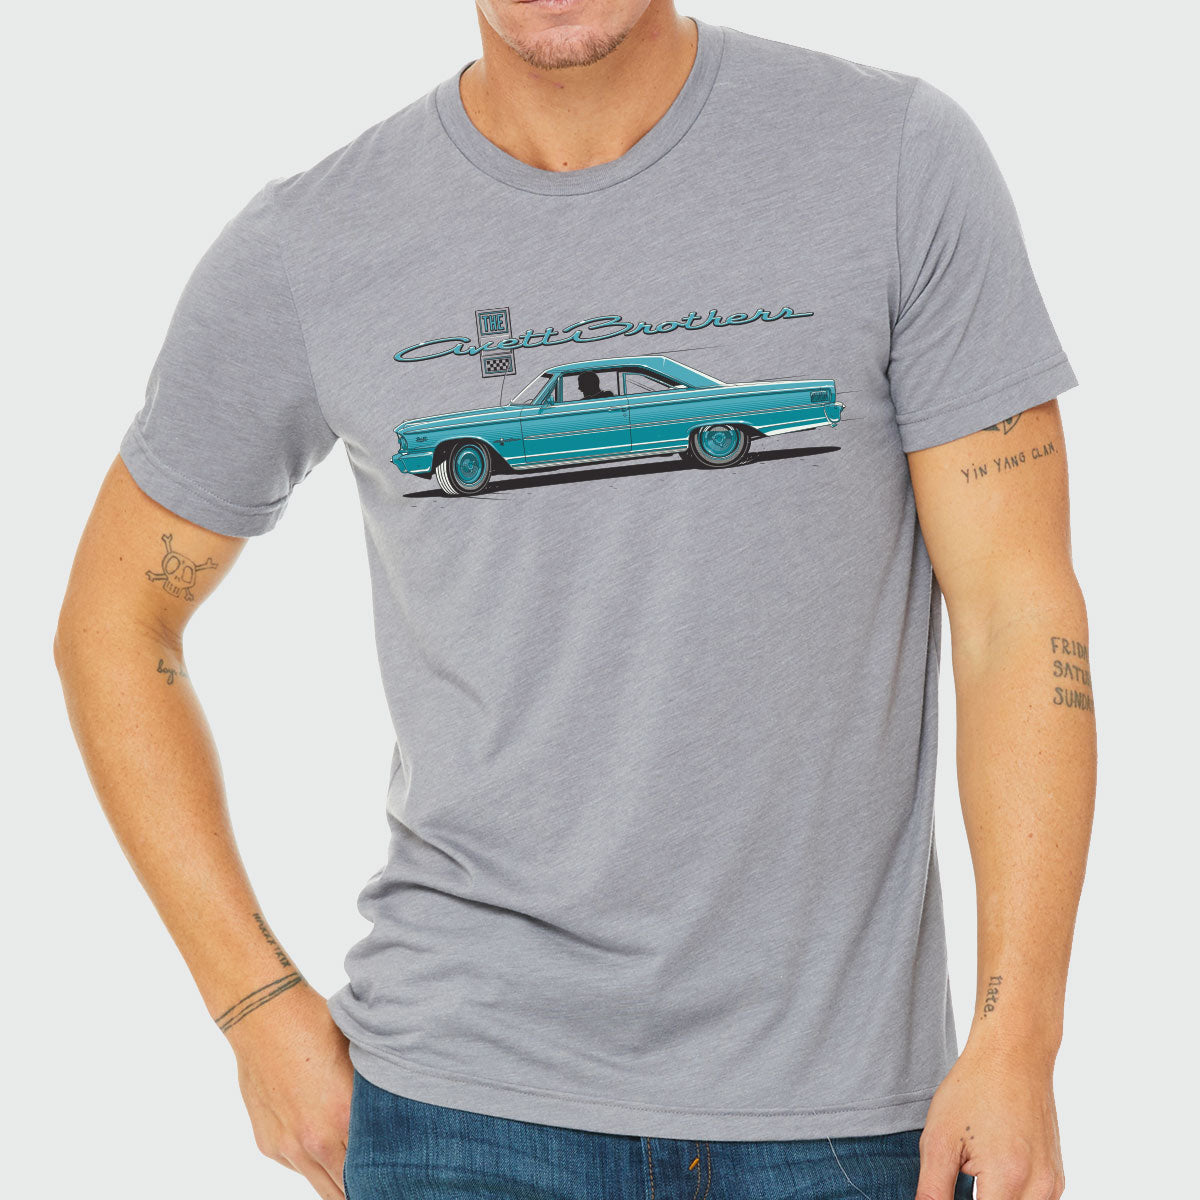 doen alsof Schotel Verspilling Ford Galaxie T-shirt – The Avett Brothers Store